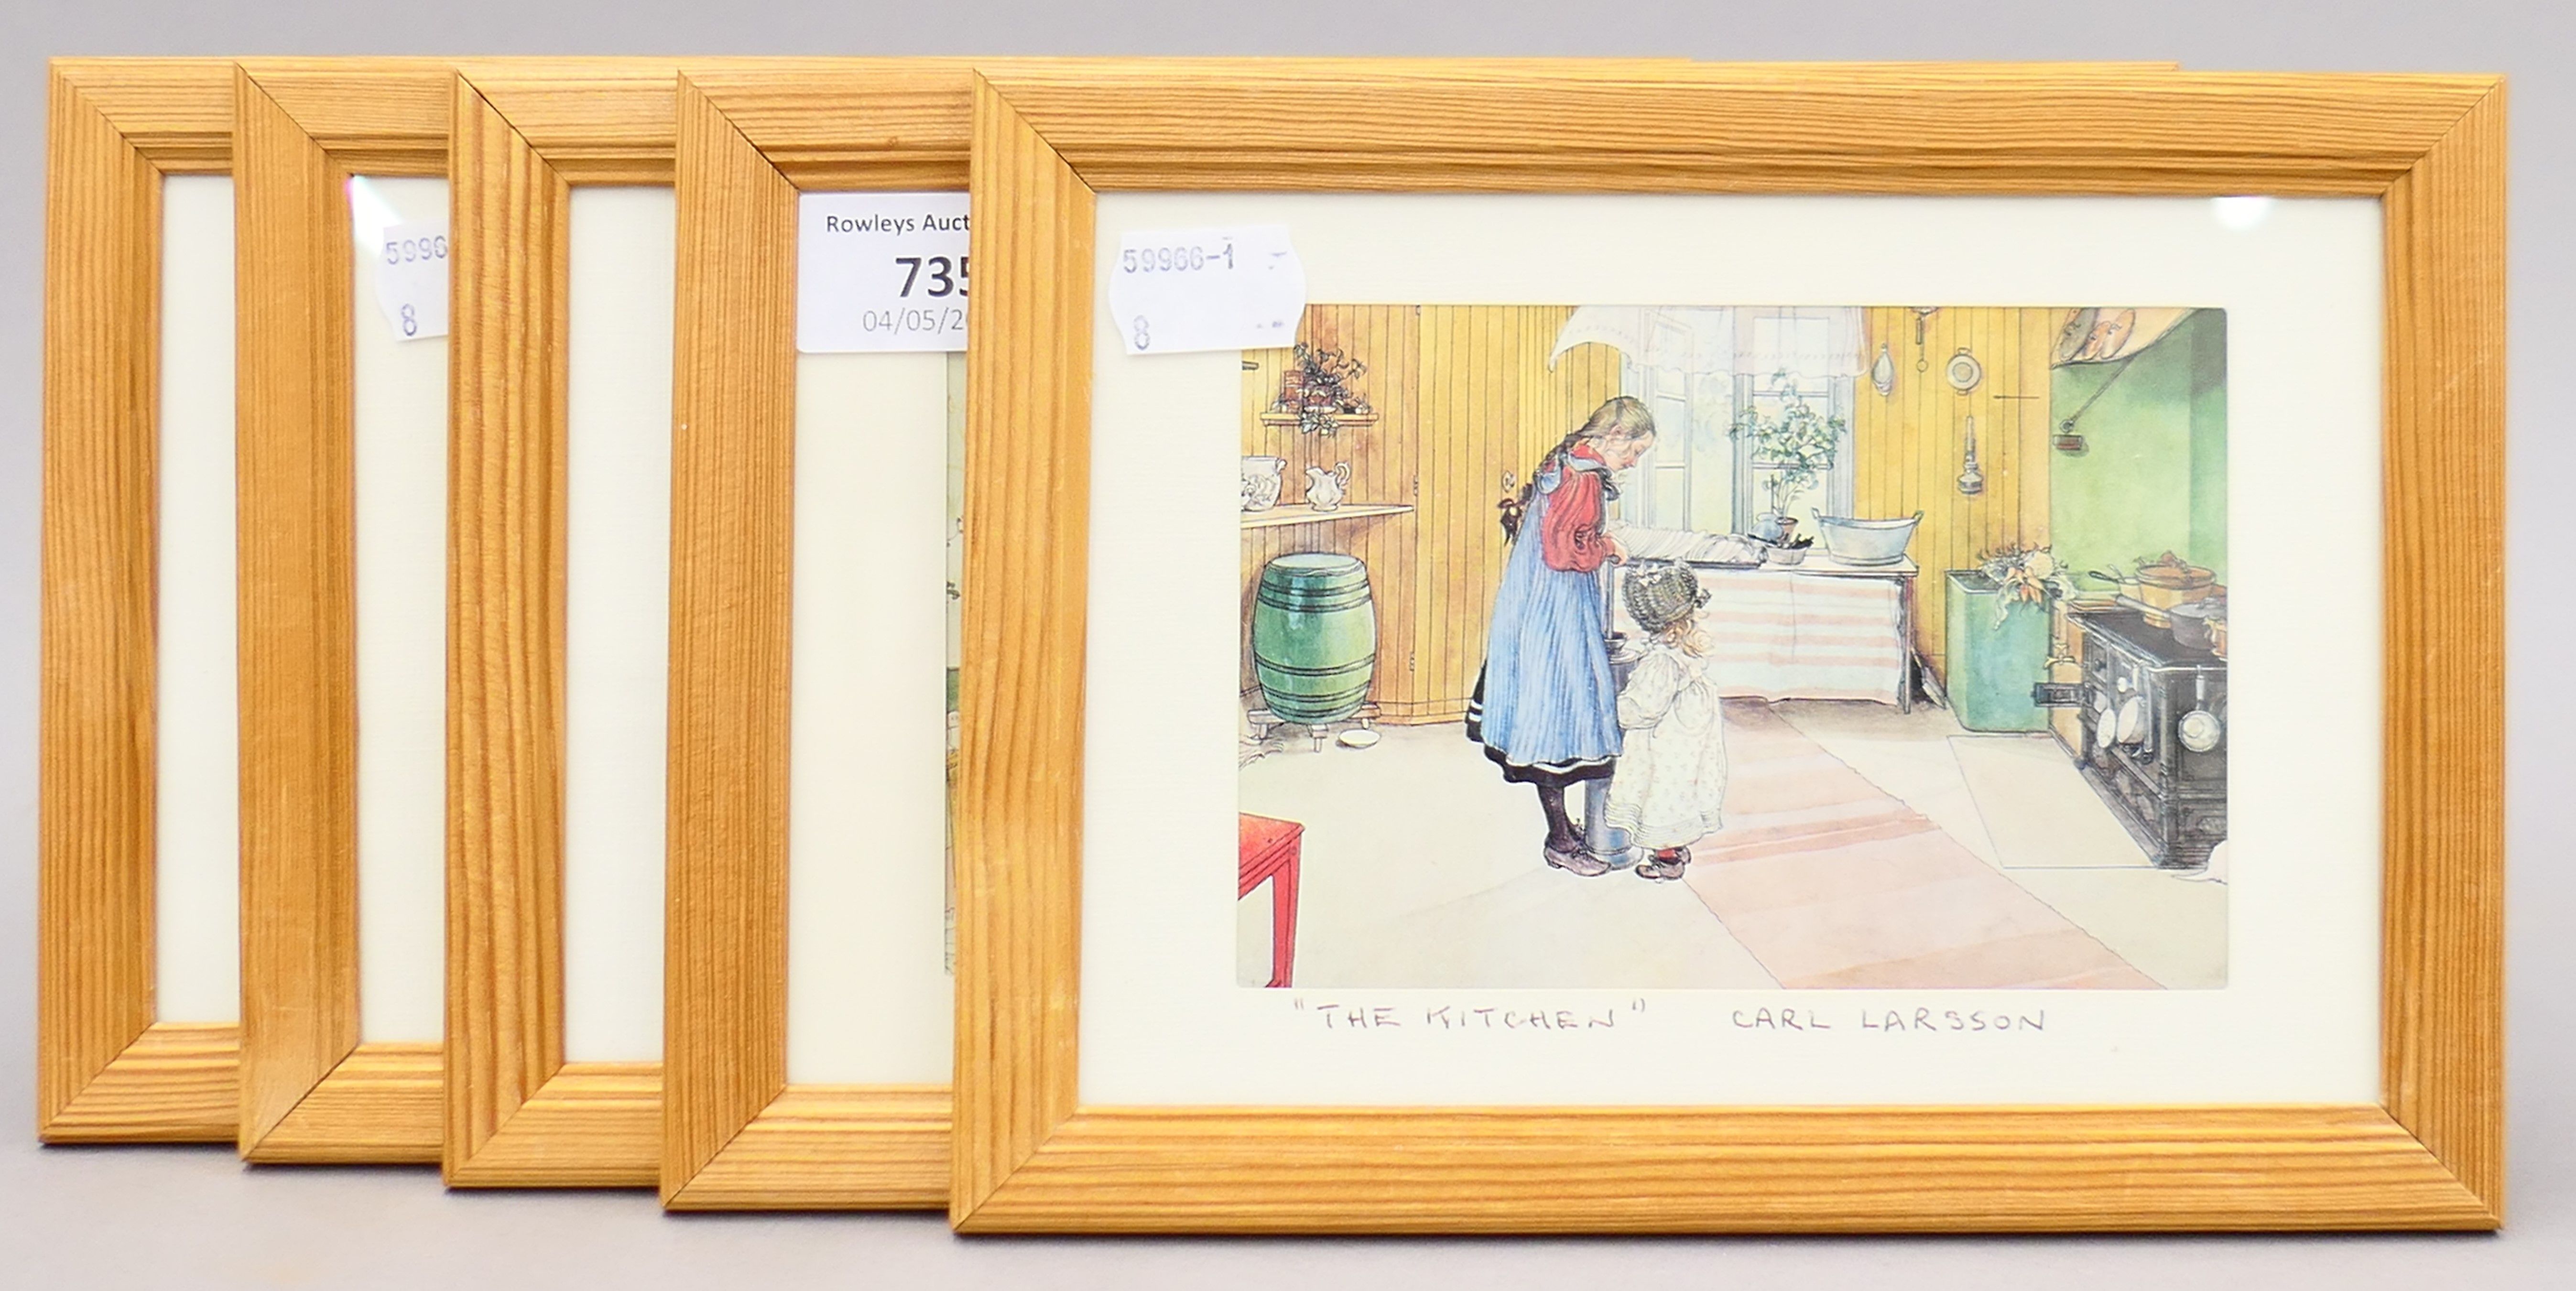 CARL LARSSON, four prints and one other, each framed and glazed. 20 x 15 cm overall.